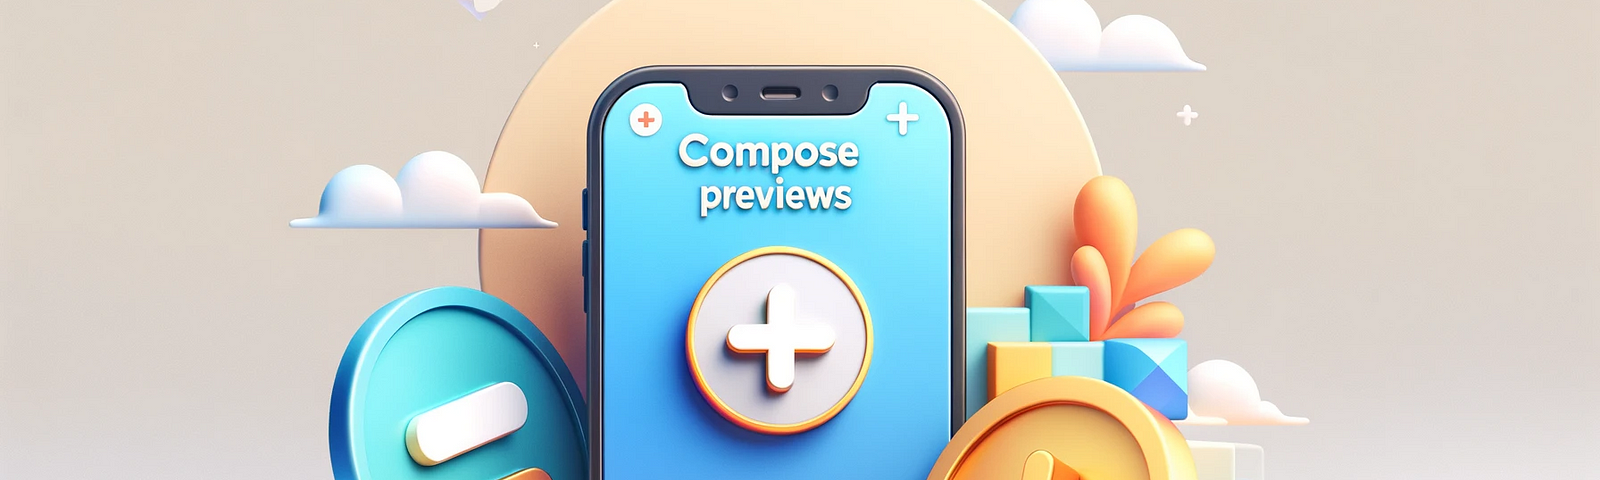 image features a sophisticated and playful composition set against a soft, neutral background. On the left, there’s a vibrantly colored 3D coin, and on the right, a sleek, landscape-oriented smartphone mockup. Between these two elements is a prominent plus icon, symbolizing a connection or addition. Above this arrangement, the phrase “Compose Previews” is written in a stylish, modern font that complements the overall design. The scene balances a clean, modern aesthetic with playful charm.